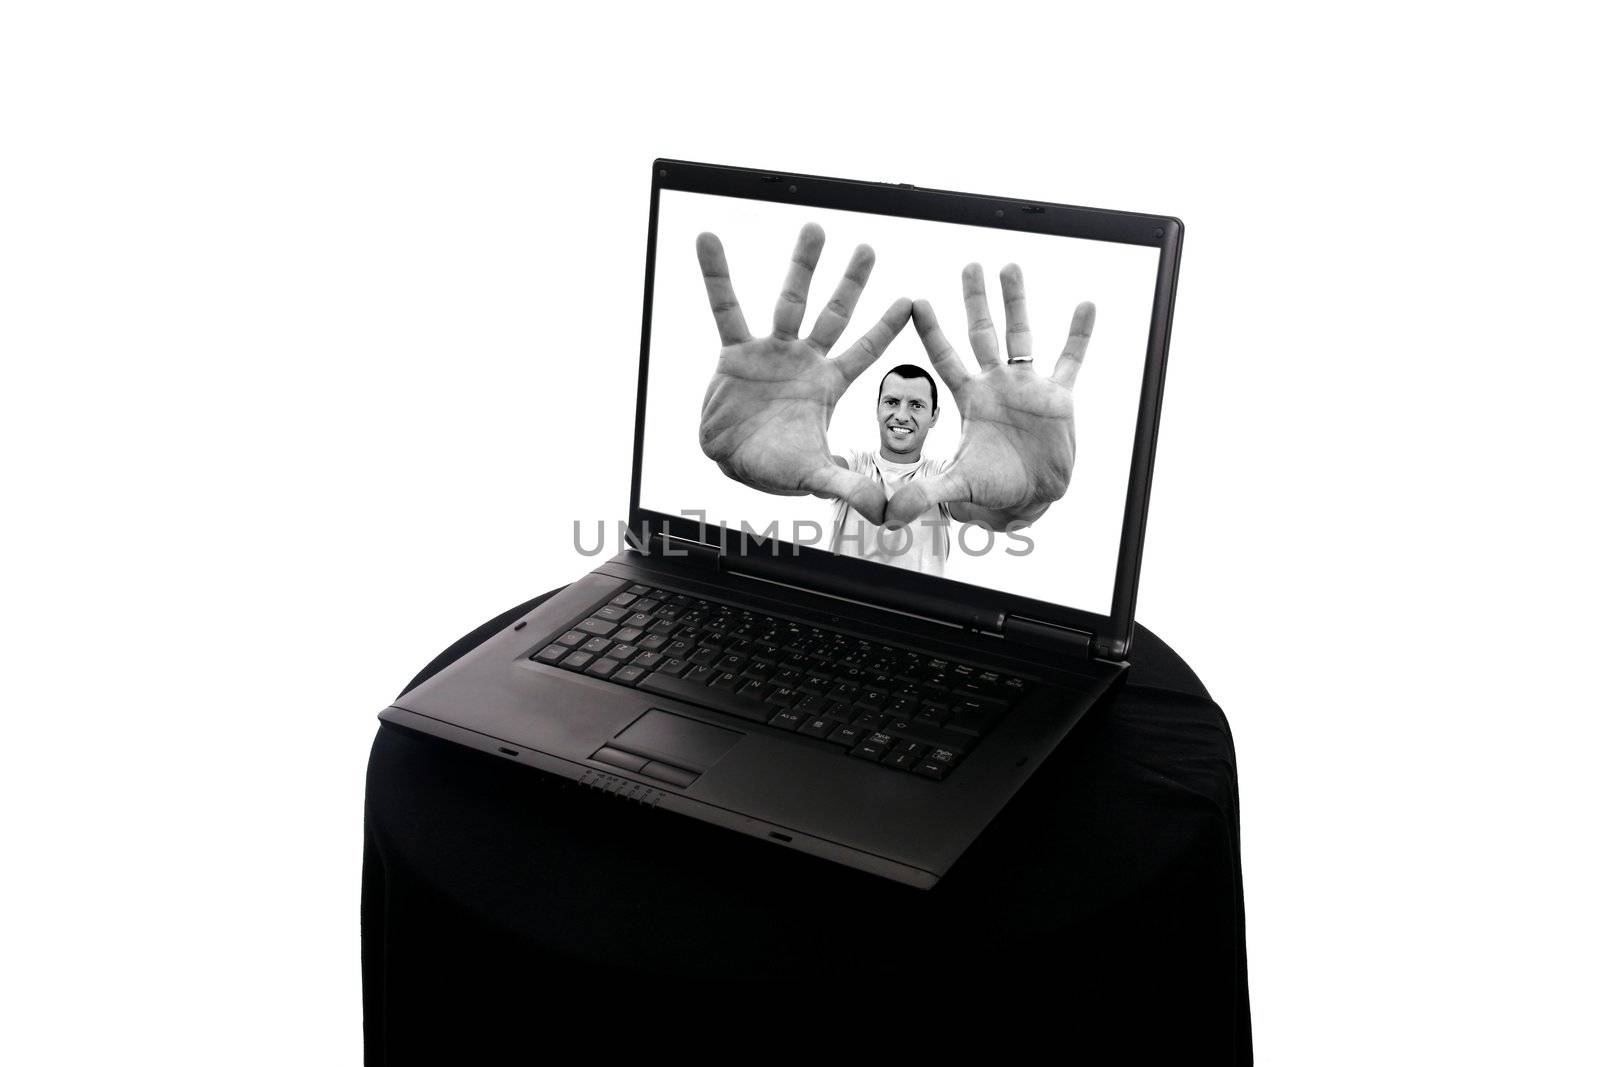 Portable Pc over white background